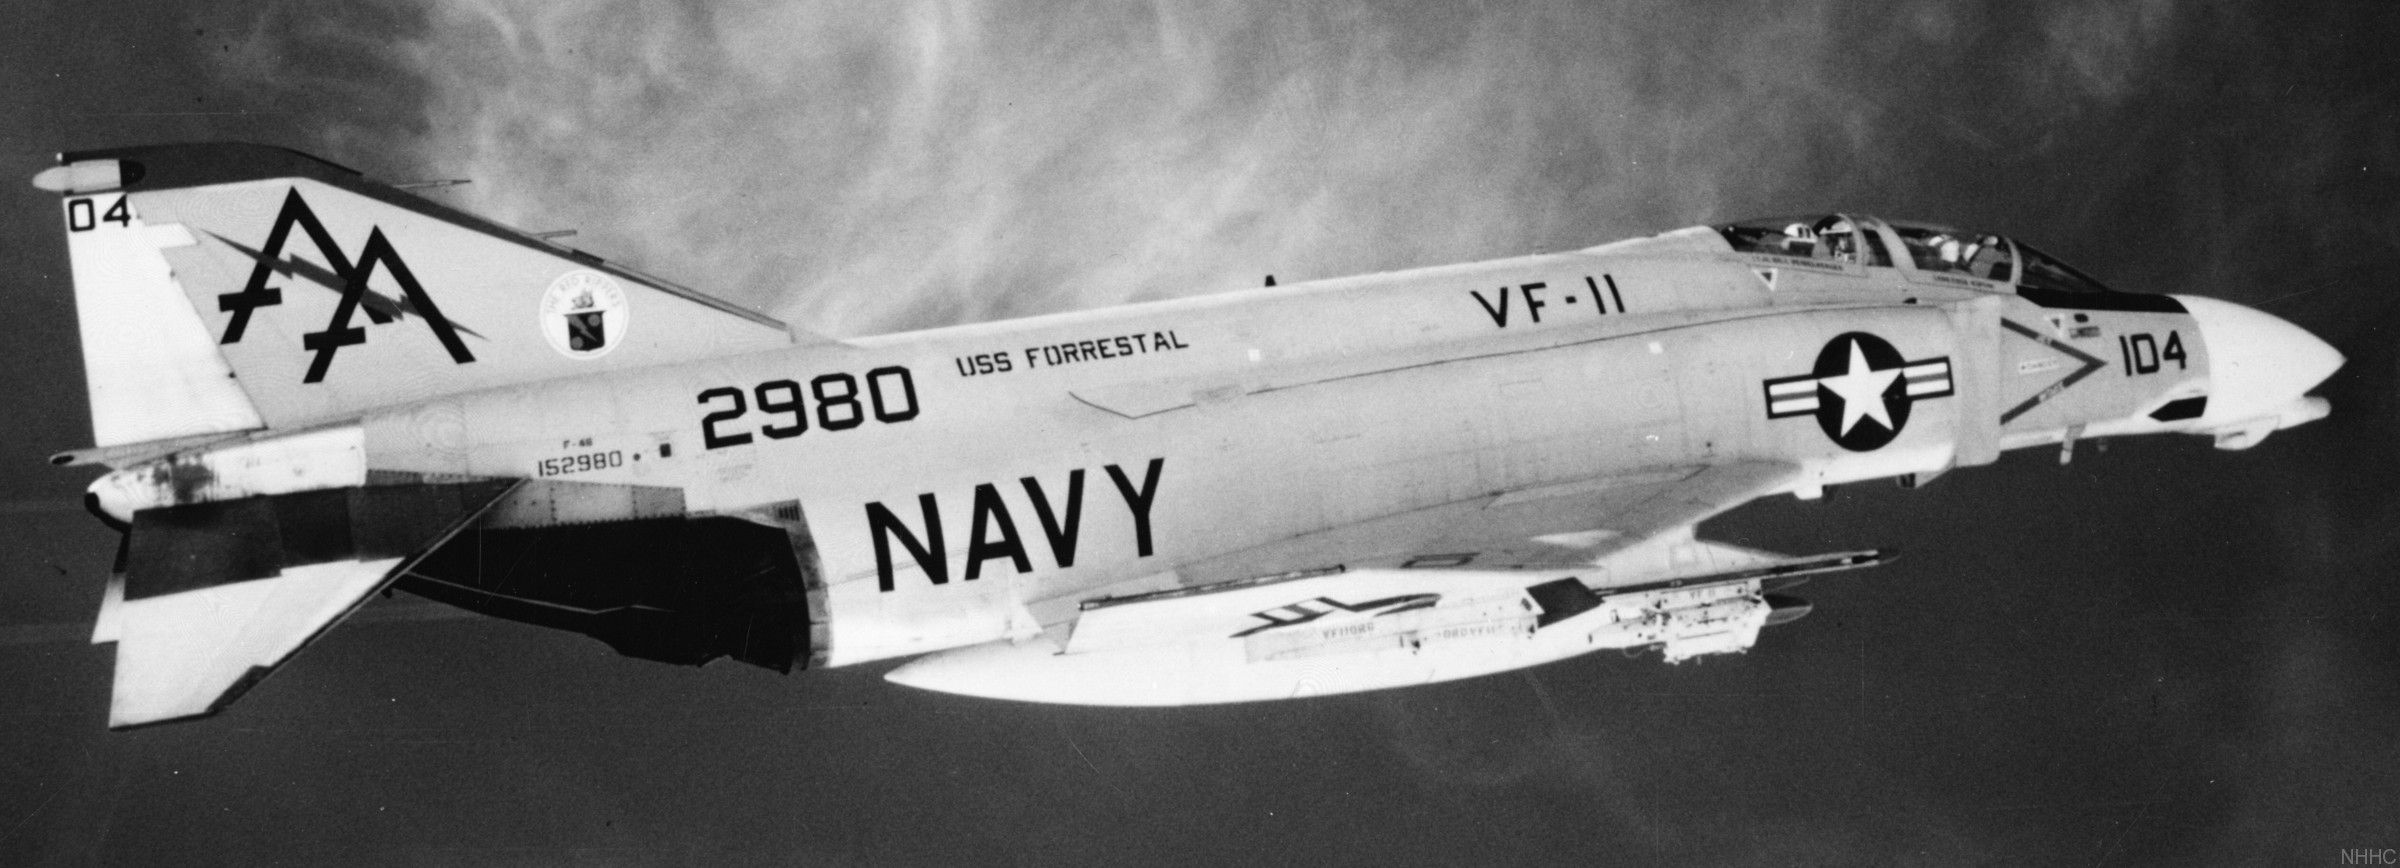 vf-11 red rippers fighter squadron us navy fitron f-4b phantom ii carrier air wing cvw-17 uss forrestal cva-59 20